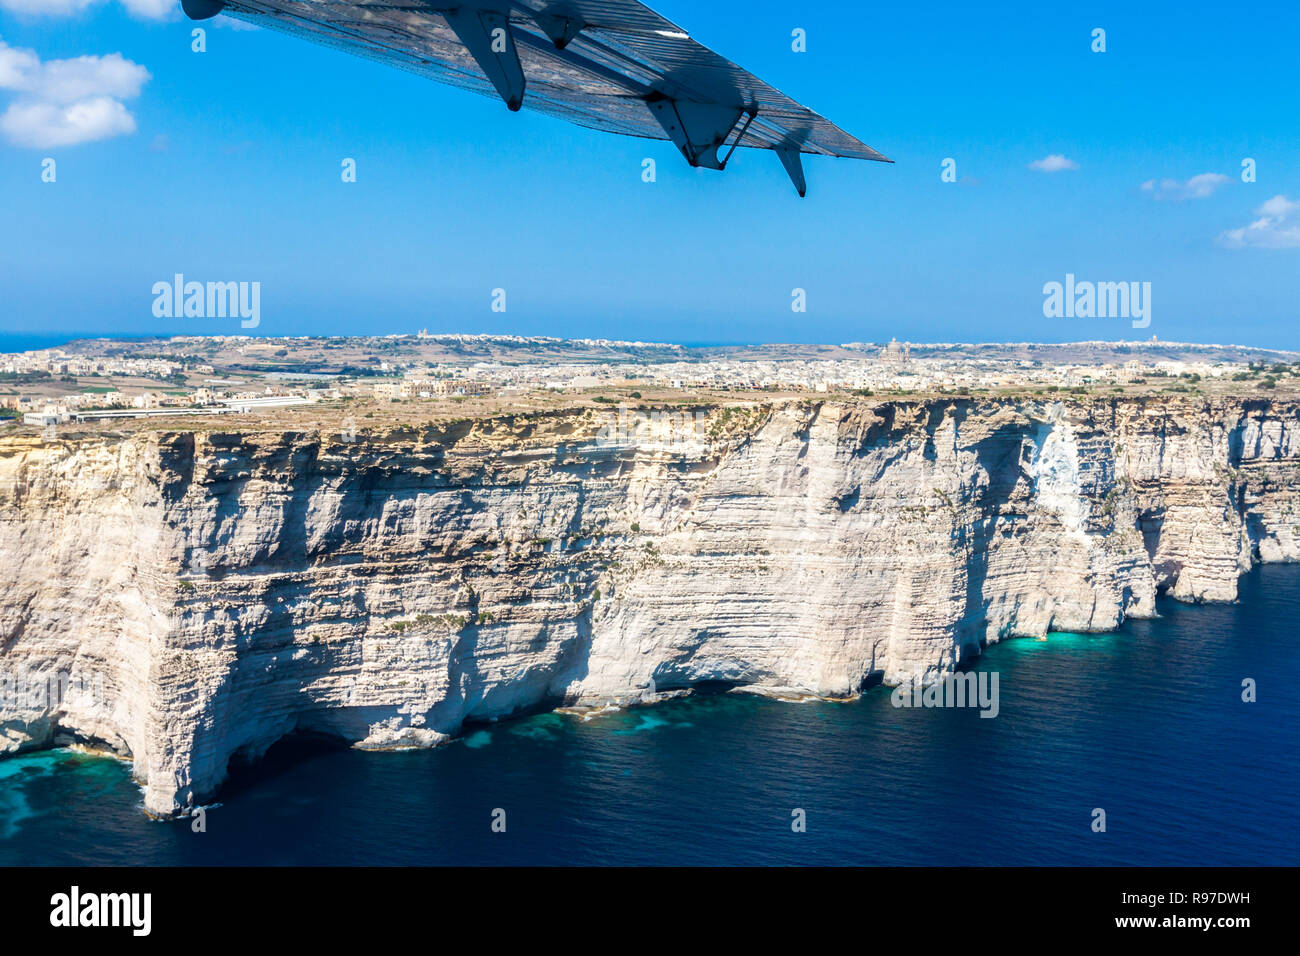 Gozo island from above, under the wing of a small plane. Aerial view of Gozo, Malta. The Rotunda of Xewkija (Casal Xeuchia) is the largest in Gozo island and its dome dominates the village. Stock Photo